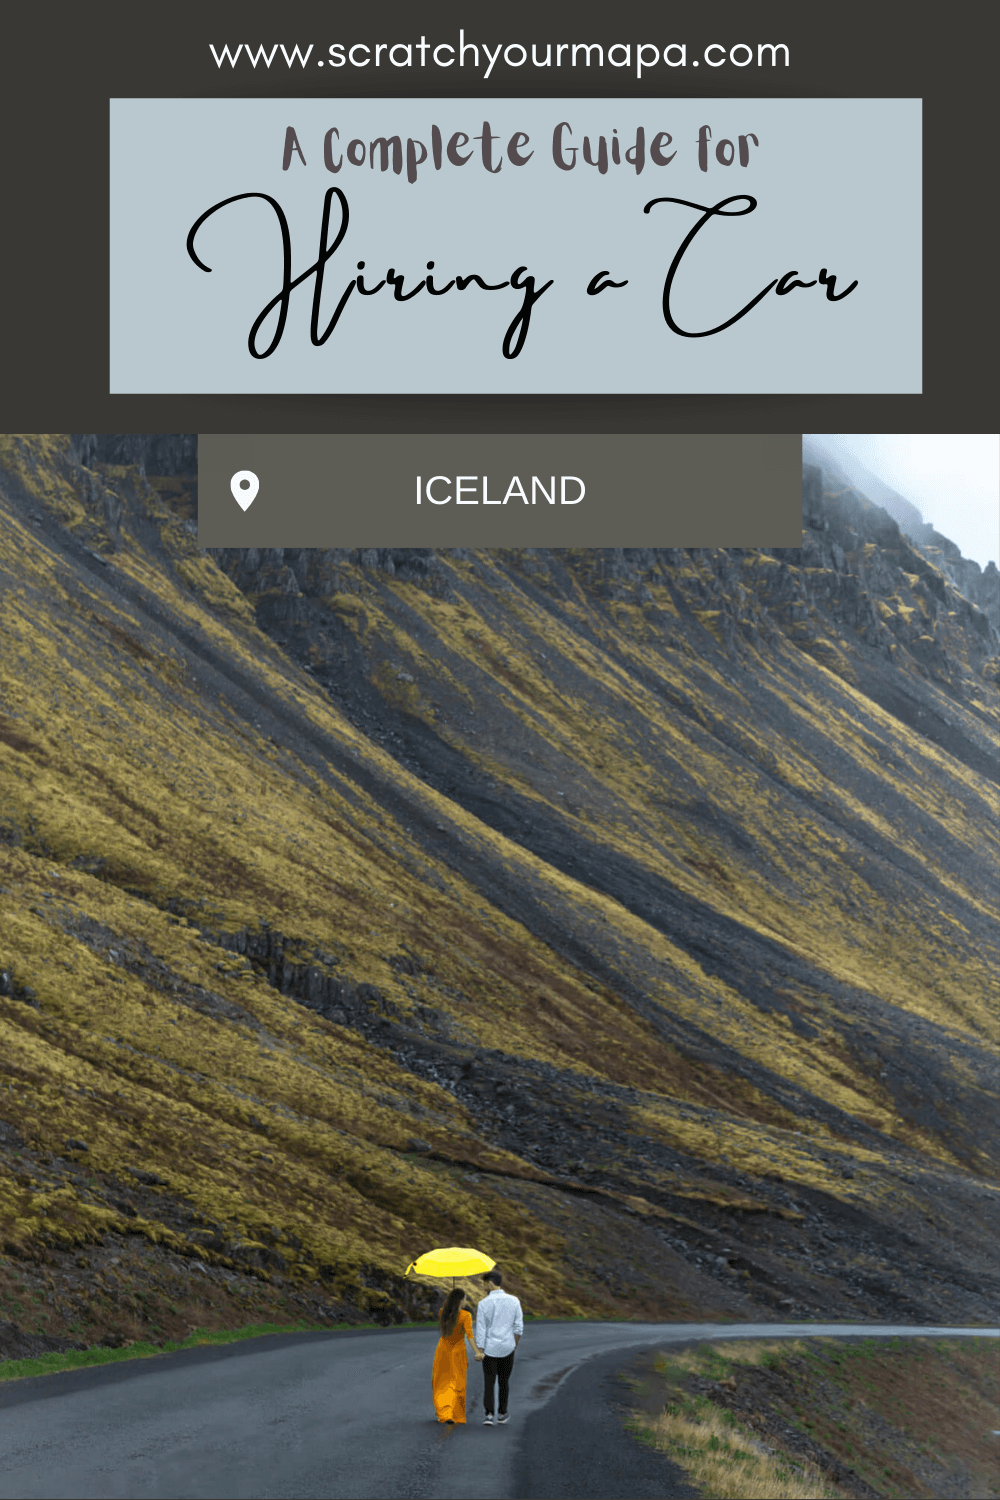 hiring a car in Iceland pin